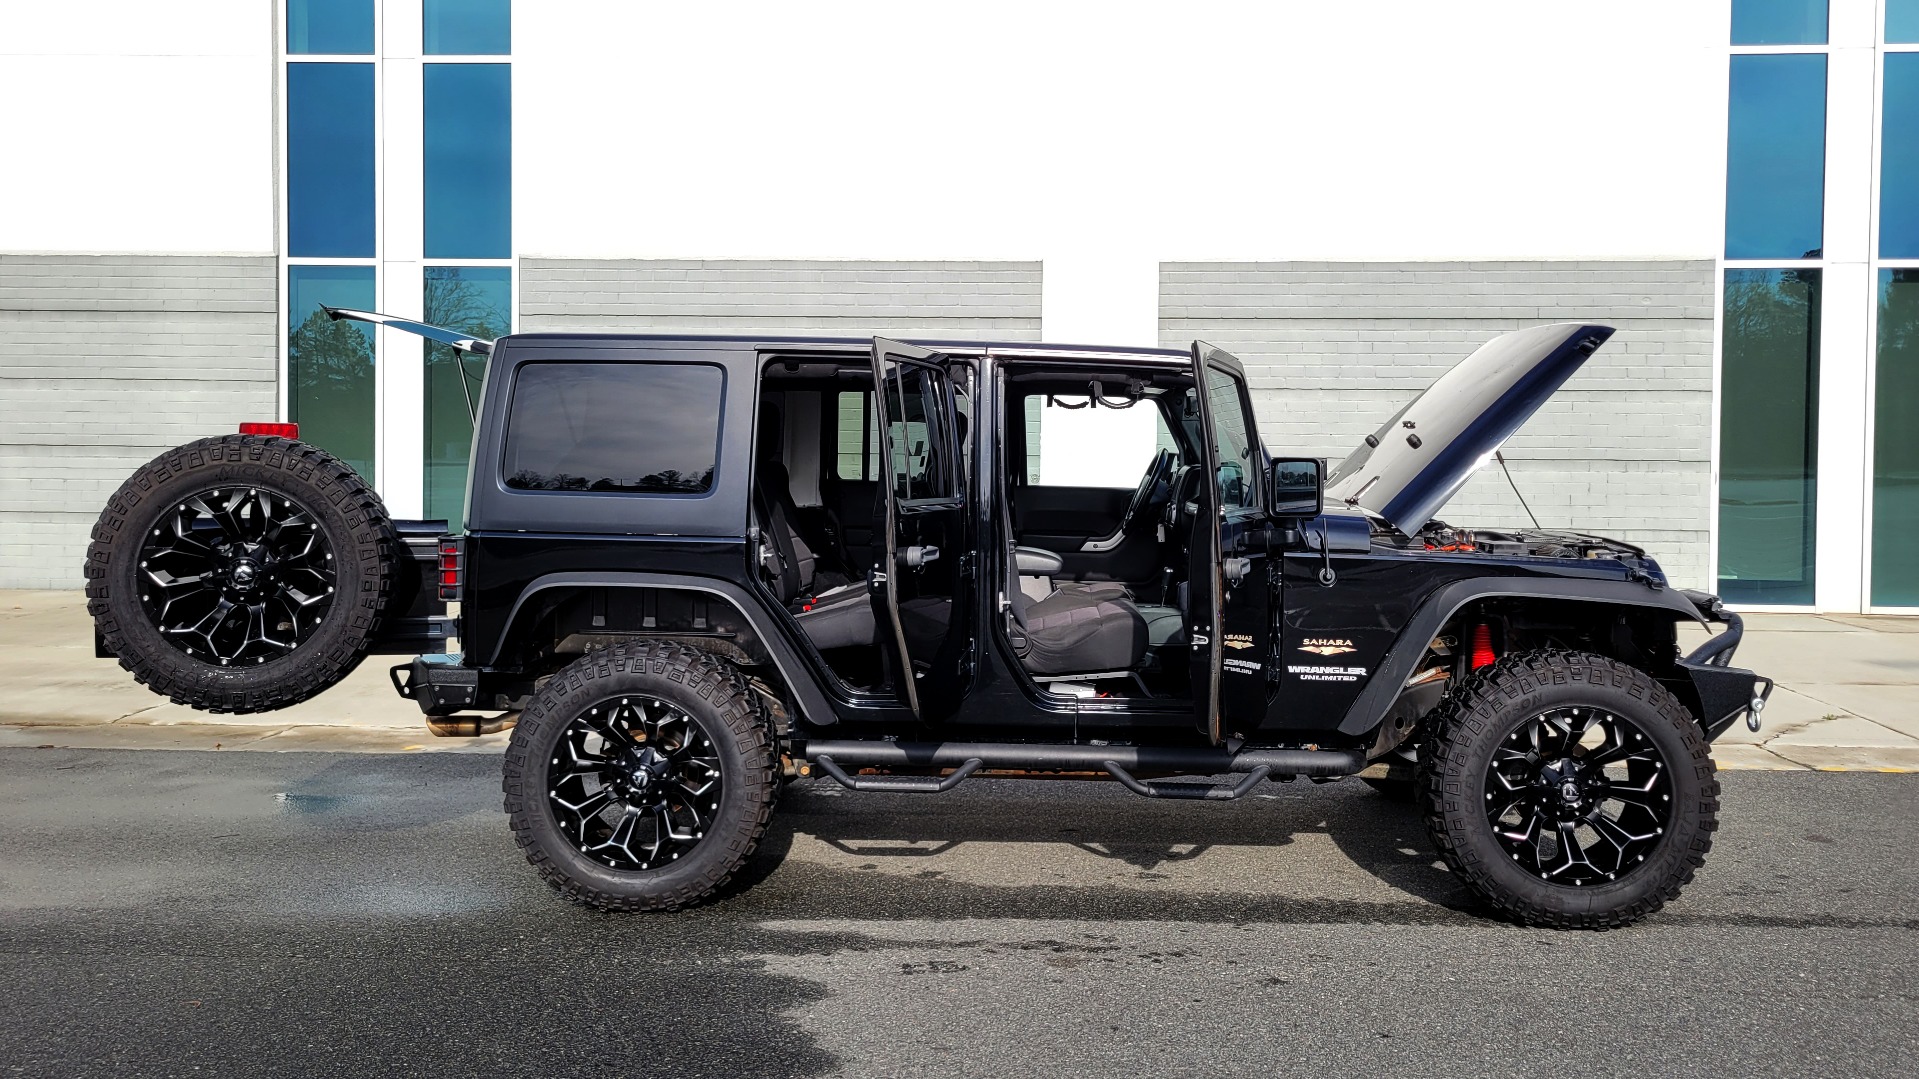 Used 2011 Jeep WRANGLER UNLIMITED SAHARA 4X4 / 3.8L V6 / 4-SPD AUTO / CUSTOM SOUND SYS for sale Sold at Formula Imports in Charlotte NC 28227 13